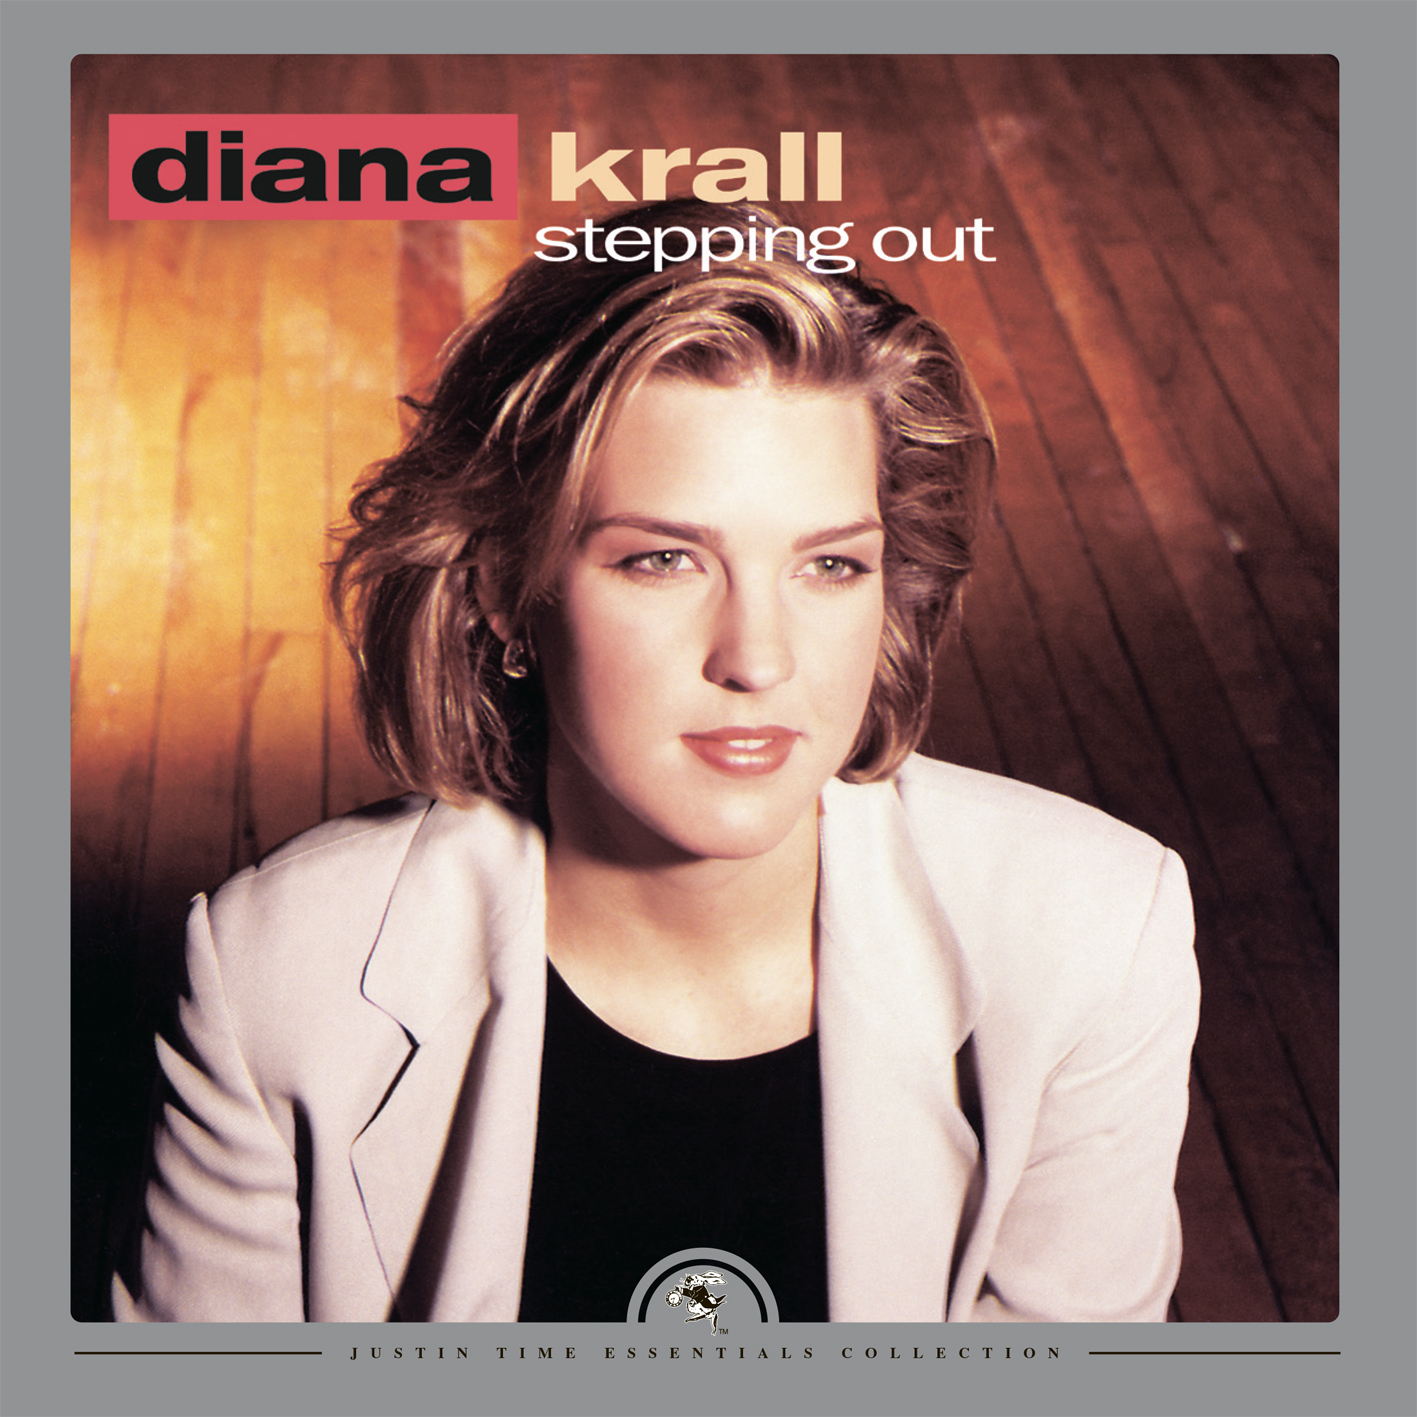 Diana Krall - Stepping Out (1993) [Remastered 2016] [HDTracks FLAC 24bit/96kHz]